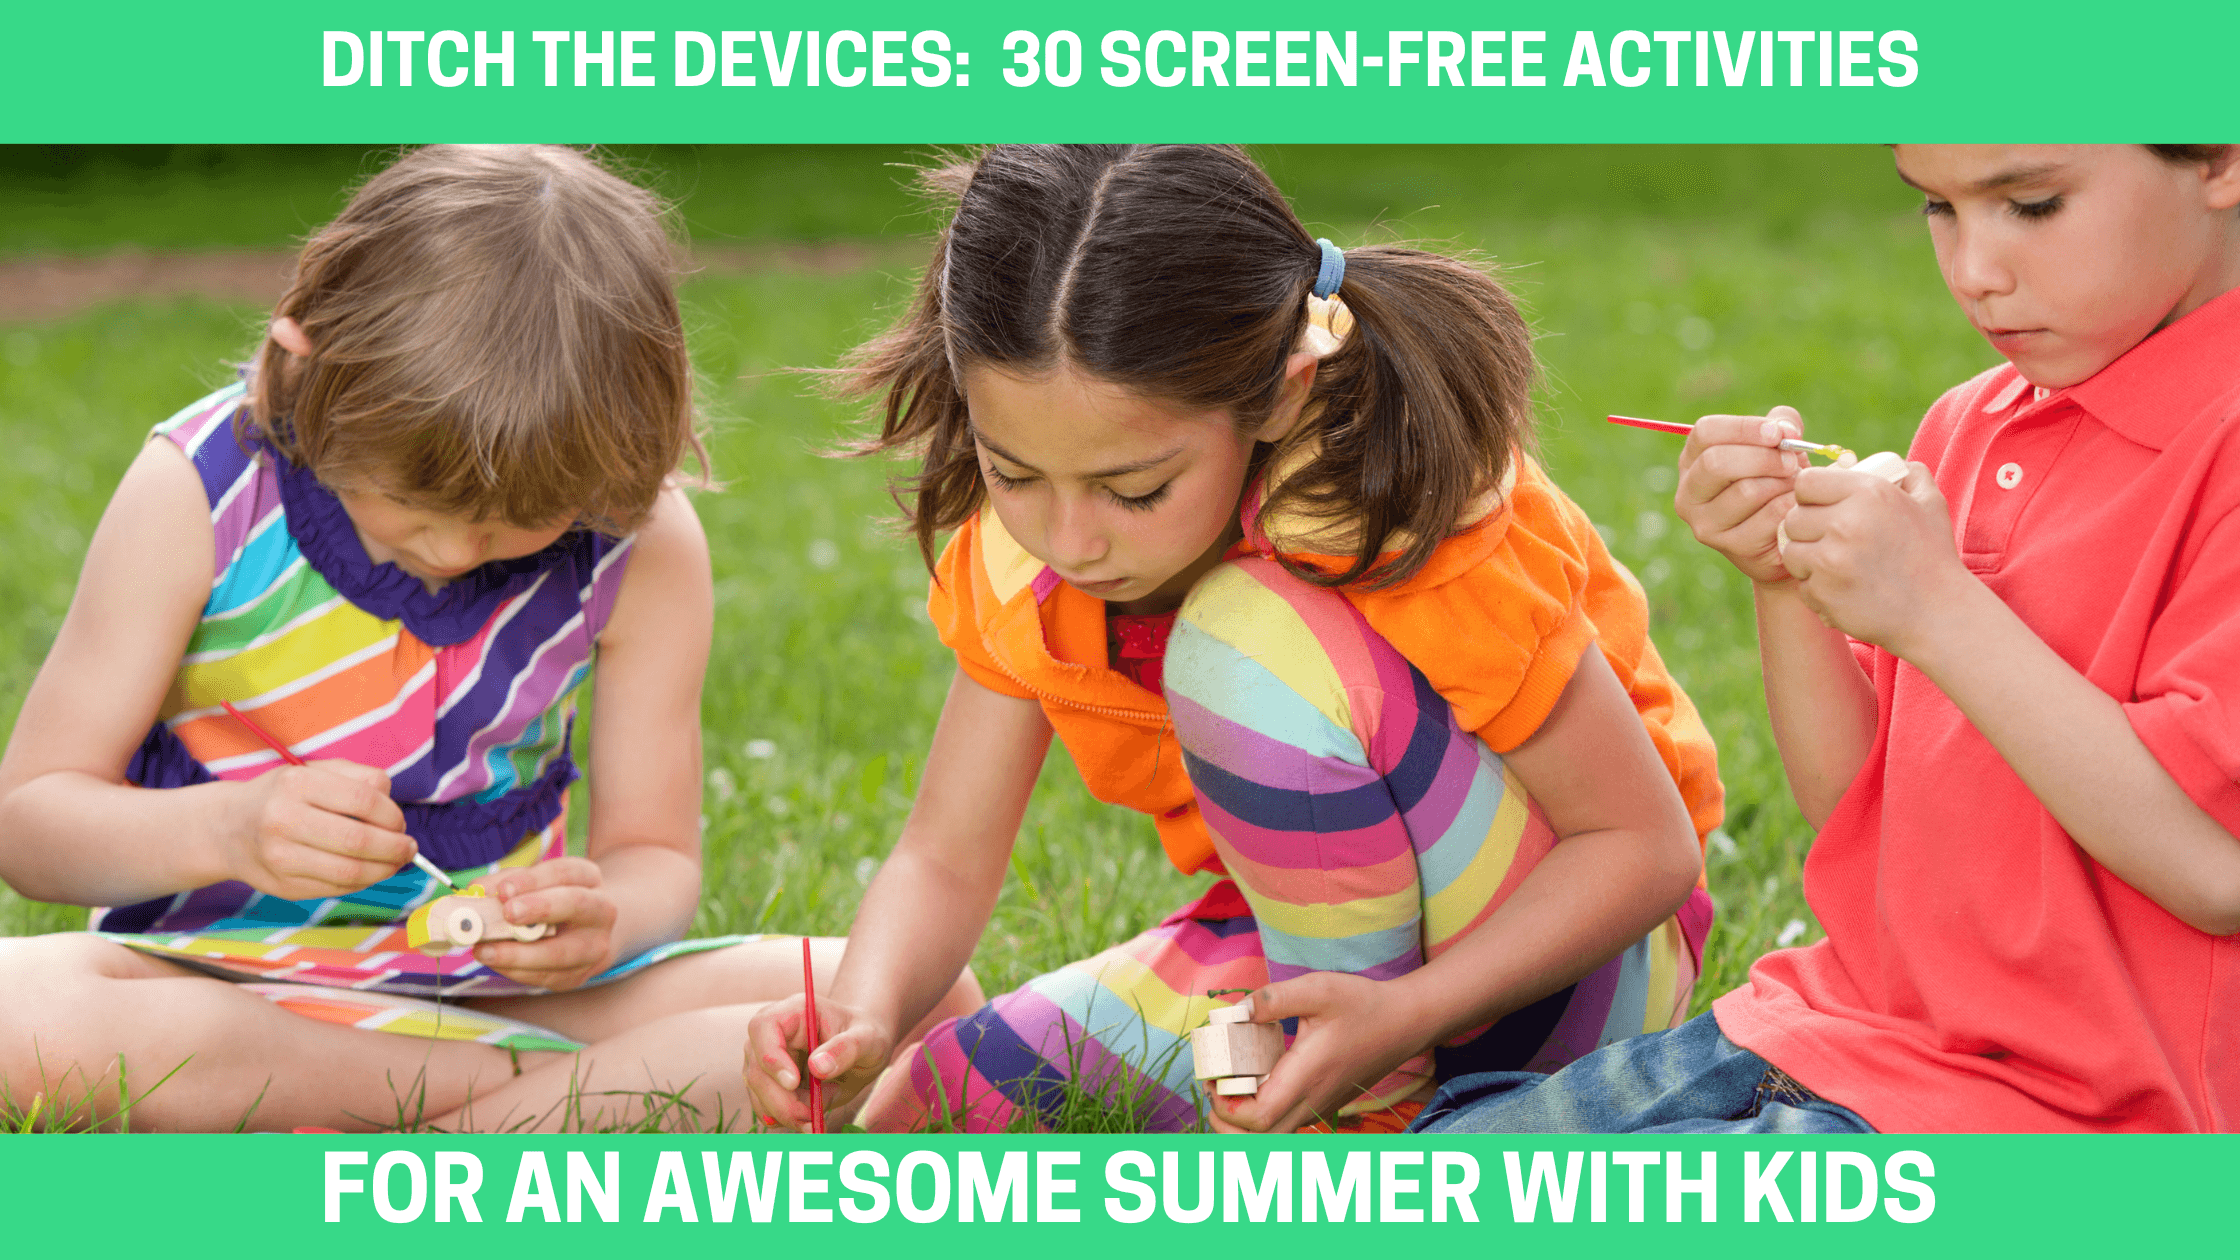 Ditch the Devices: 30 Screen-Free Activities for an Awesome Summer with Kids (Preschool to Teens) - Orgone Energy Australia